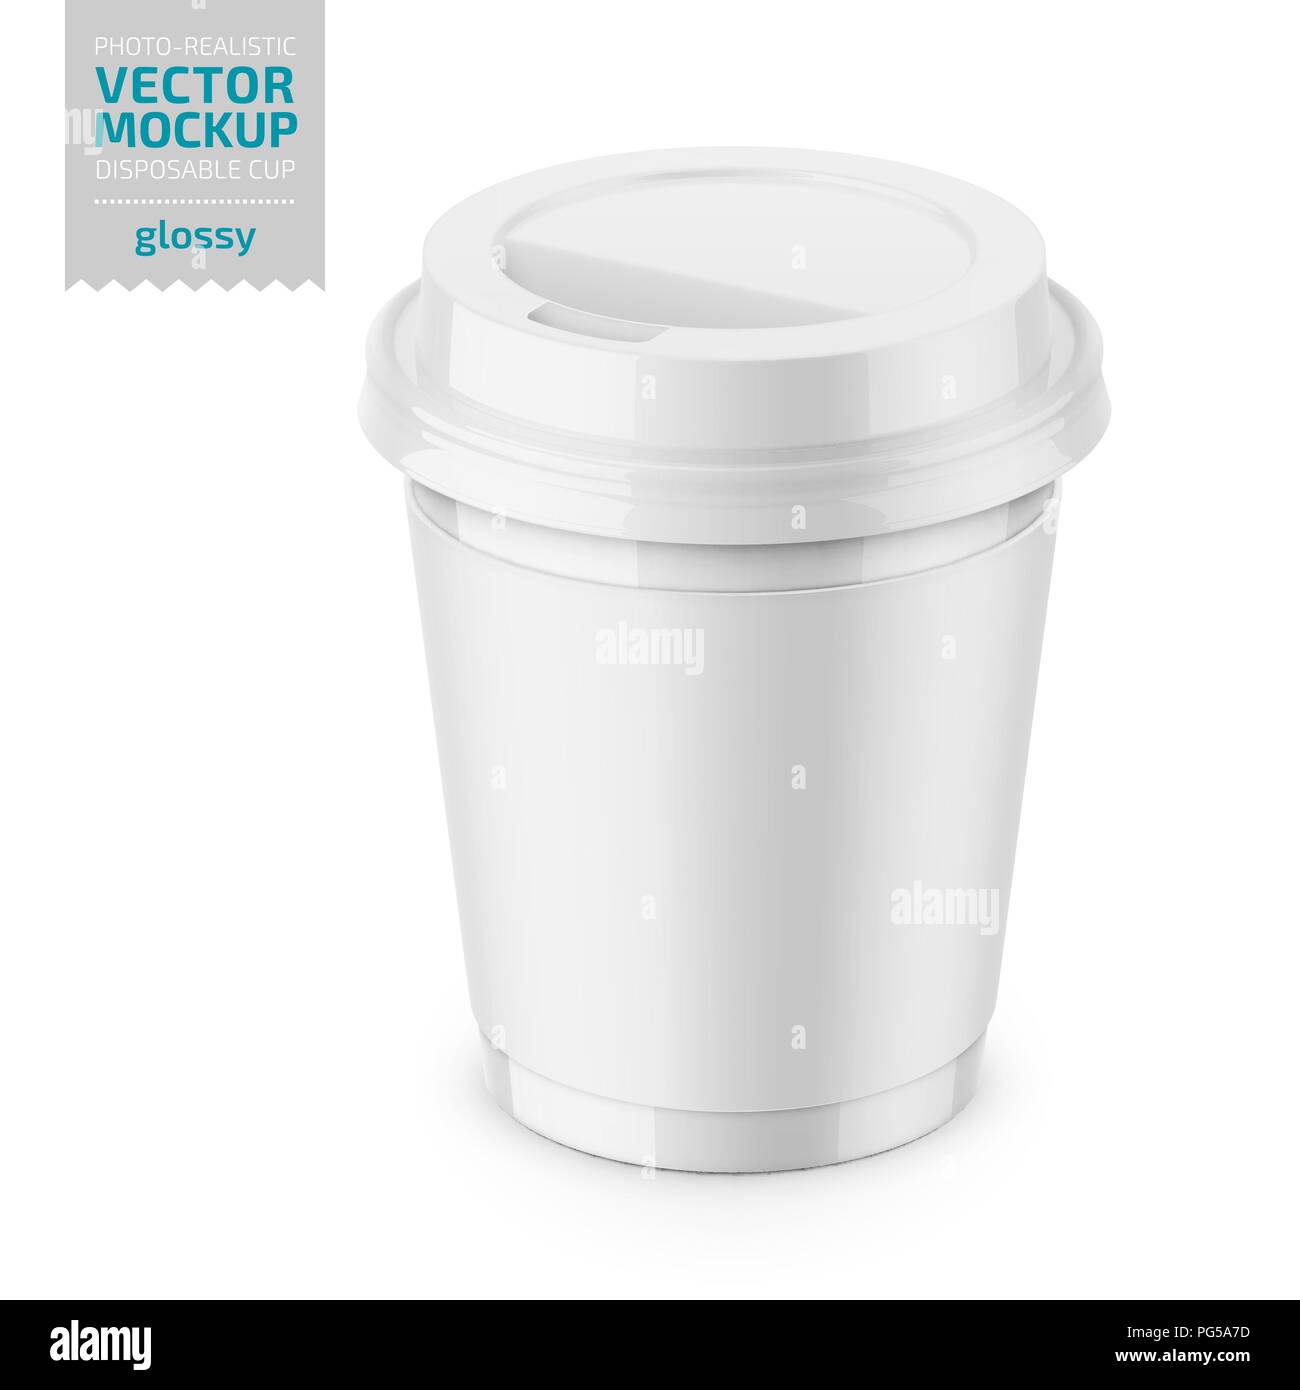 https://c8.alamy.com/comp/PG5A7D/white-glossy-disposable-cup-with-lid-template-PG5A7D.jpg